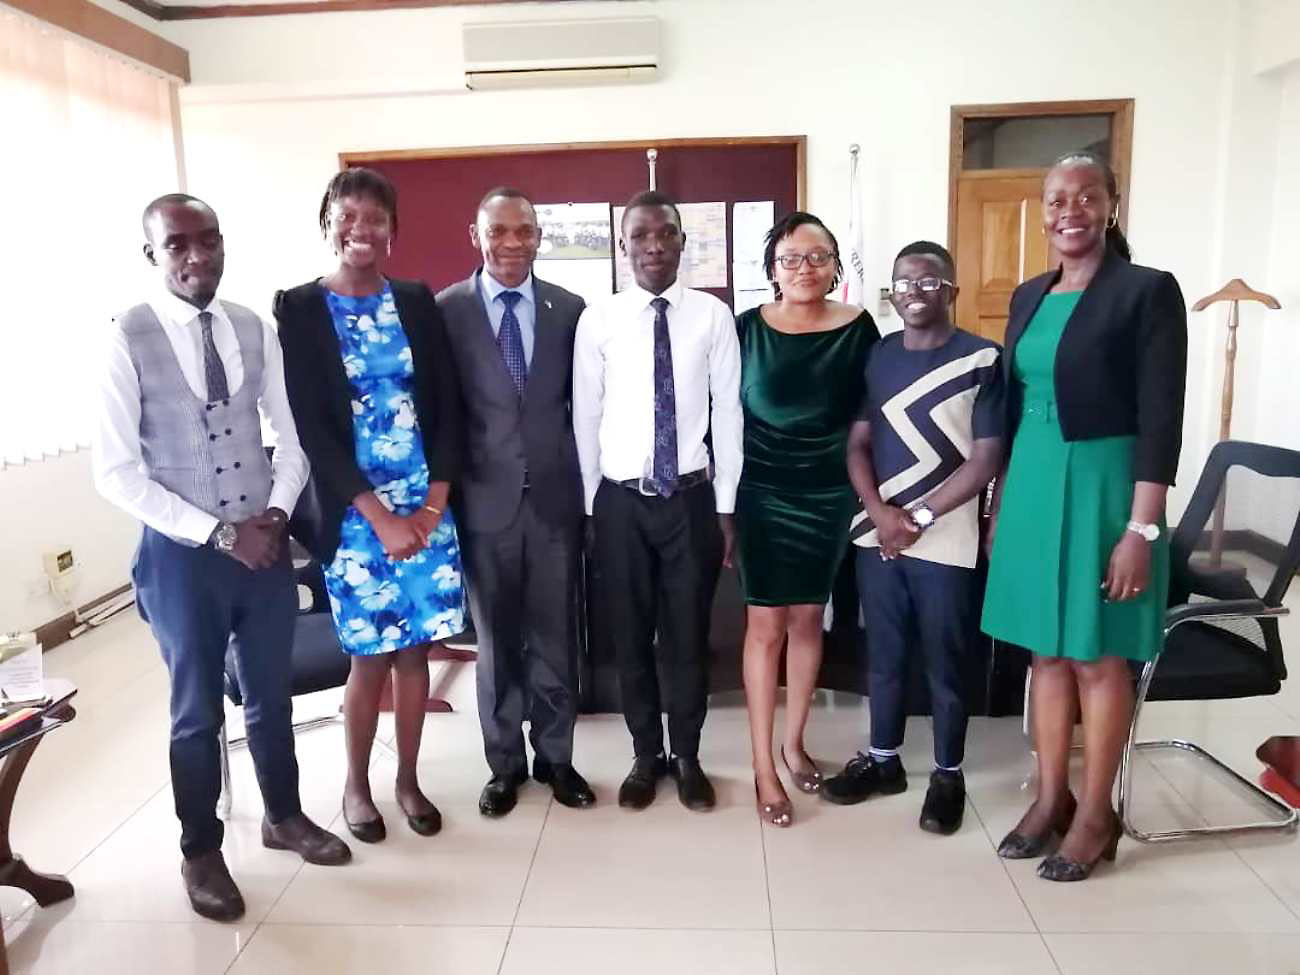 The DVCAA-Prof. Umar Kakumba (3rd L) and Dean of Students-Mrs. Winifred Kabumbuli (R) with L-R: Chairperson-William Kananga, 86th Guild Speaker-Ms. Angel Kampi, Comm. Finance-Mr. Martin Wambona, Vice Chair-Ms. Tracy Kirabo and PRO-Mr. Saad Ddumba during the brief award ceremony on 14th Apr 2022, DVCAA's Office, Senate Building, Makerere University.